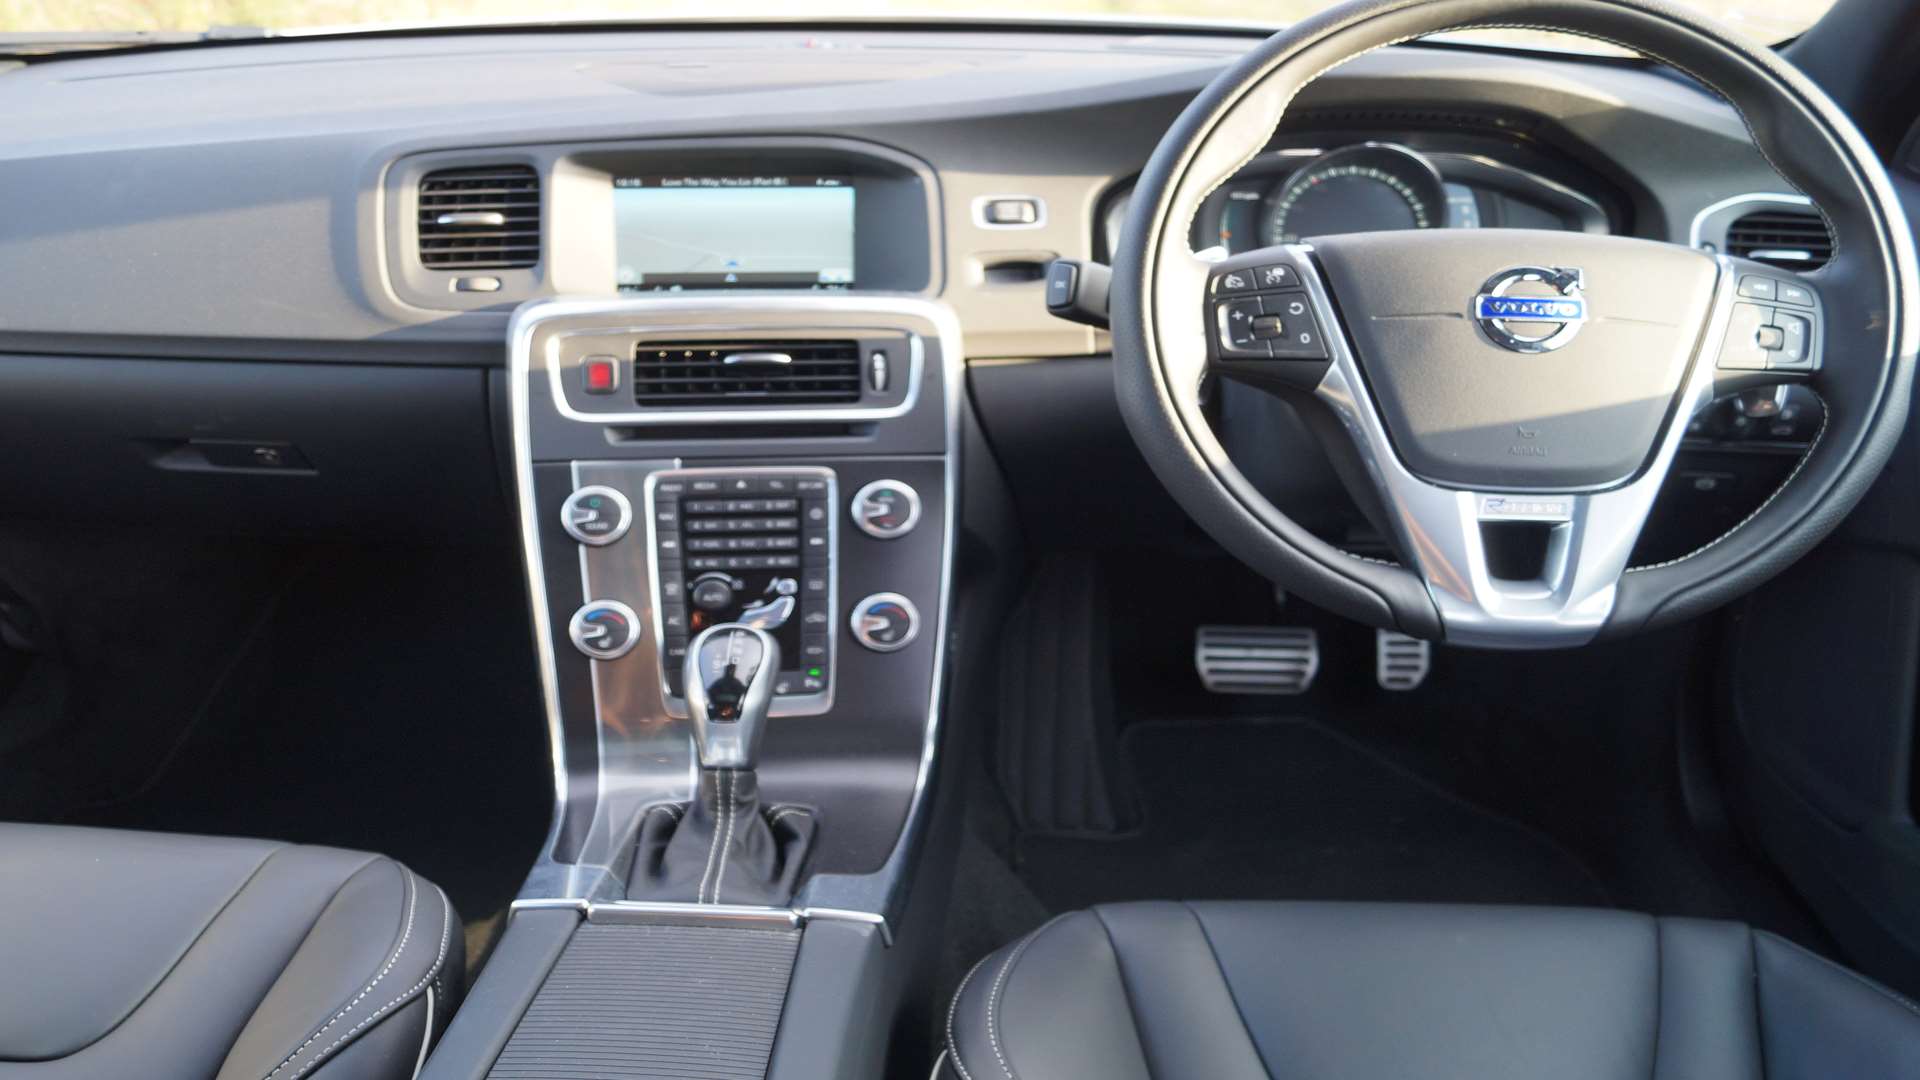 The interior is well put together but there's just too many buttons